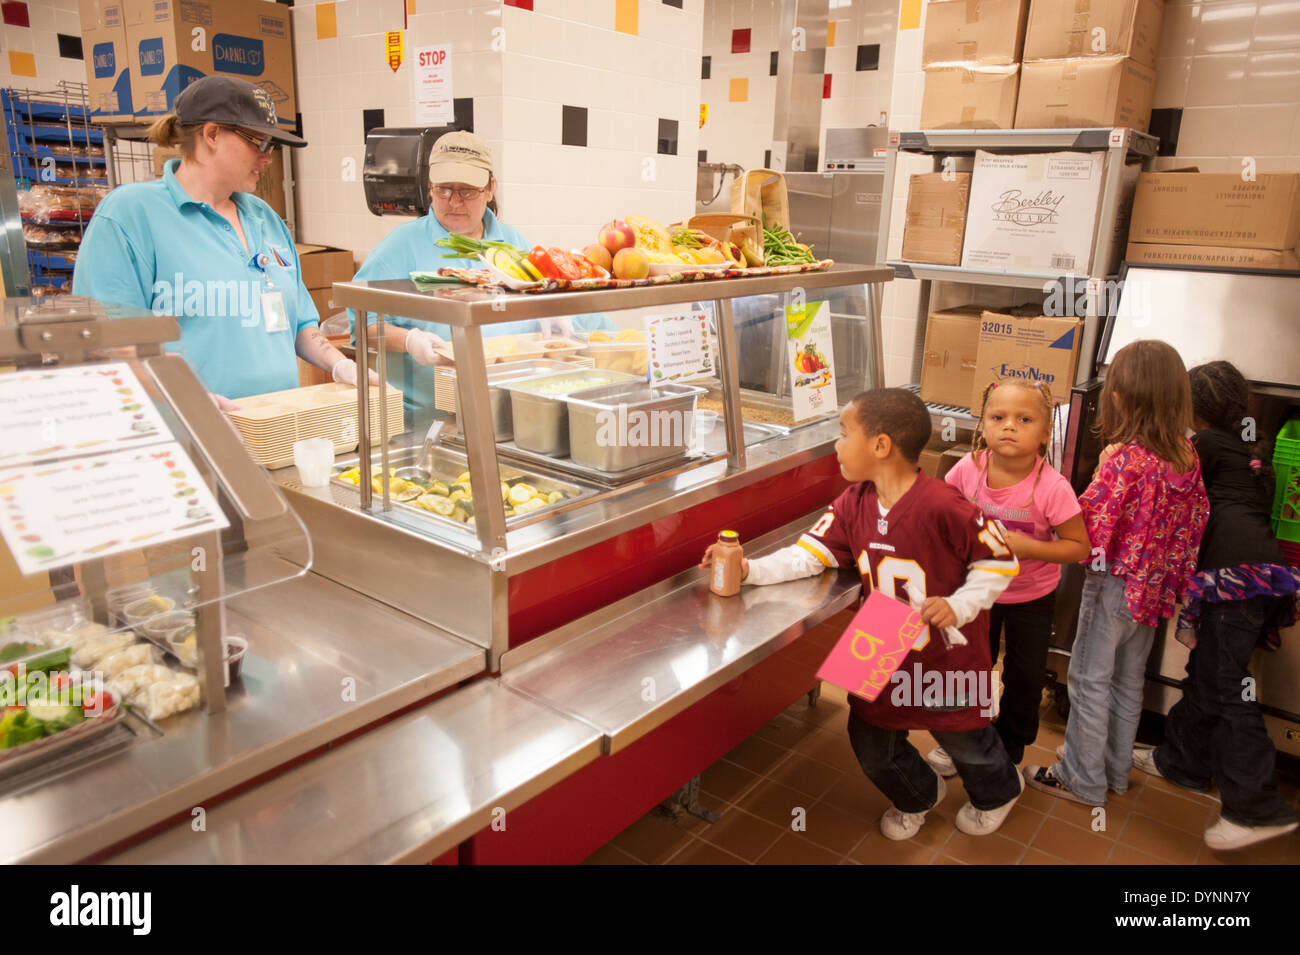 Children in line at school cafeteria Hagerstown, Maryland Stock Photo